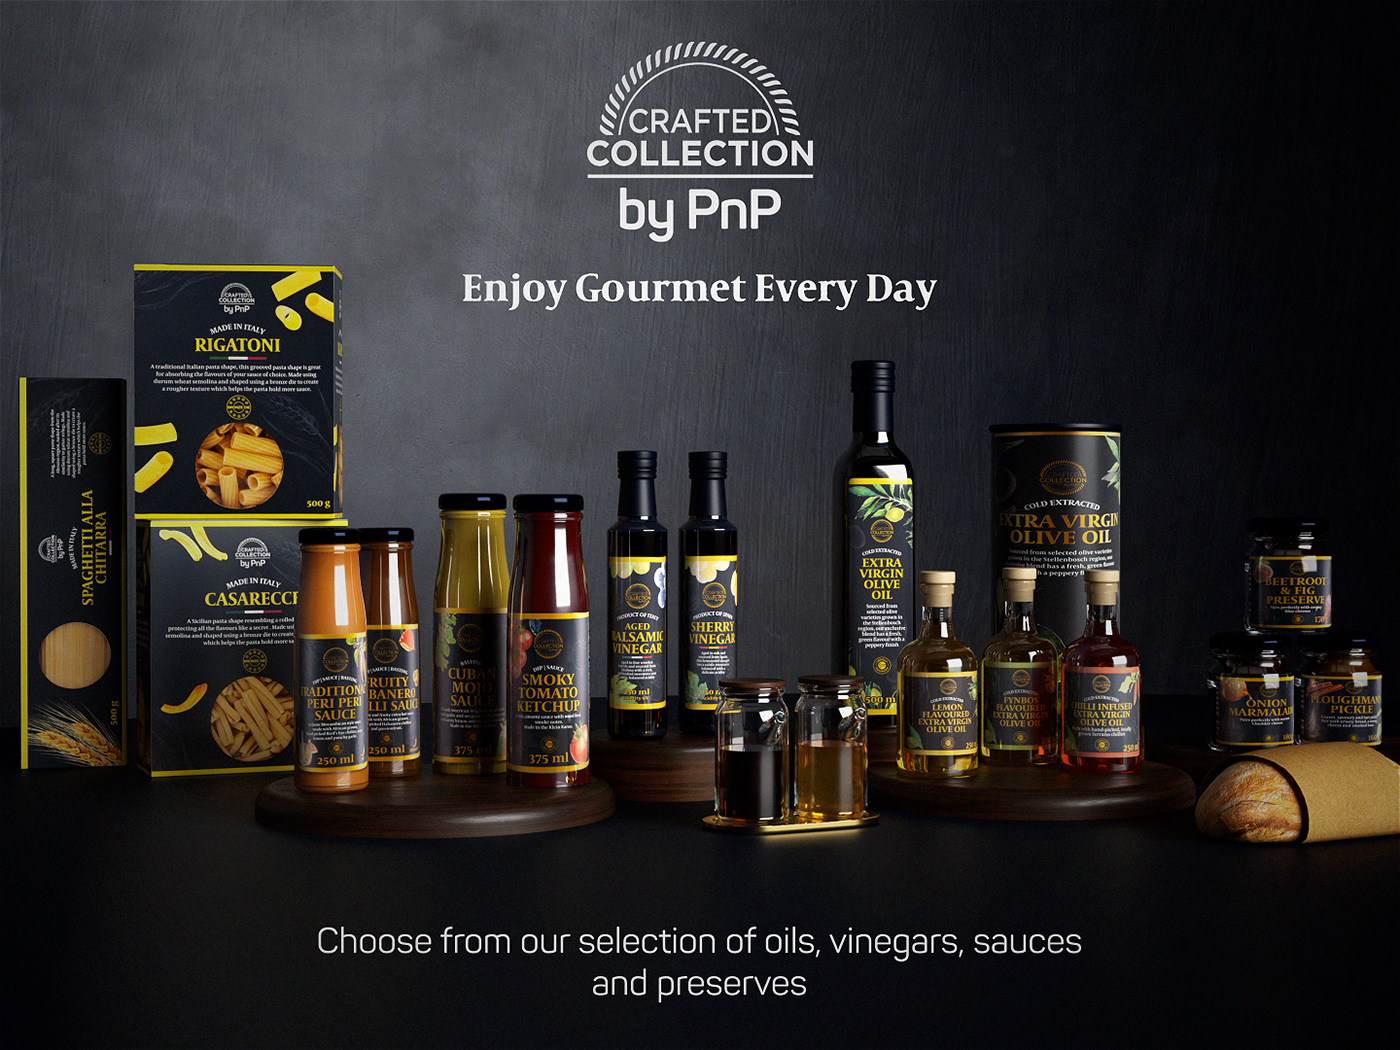 vinegar Olive Oil Pasta preserves Packaging brand identity Graphic Designer crafted collection picknpay  sauces